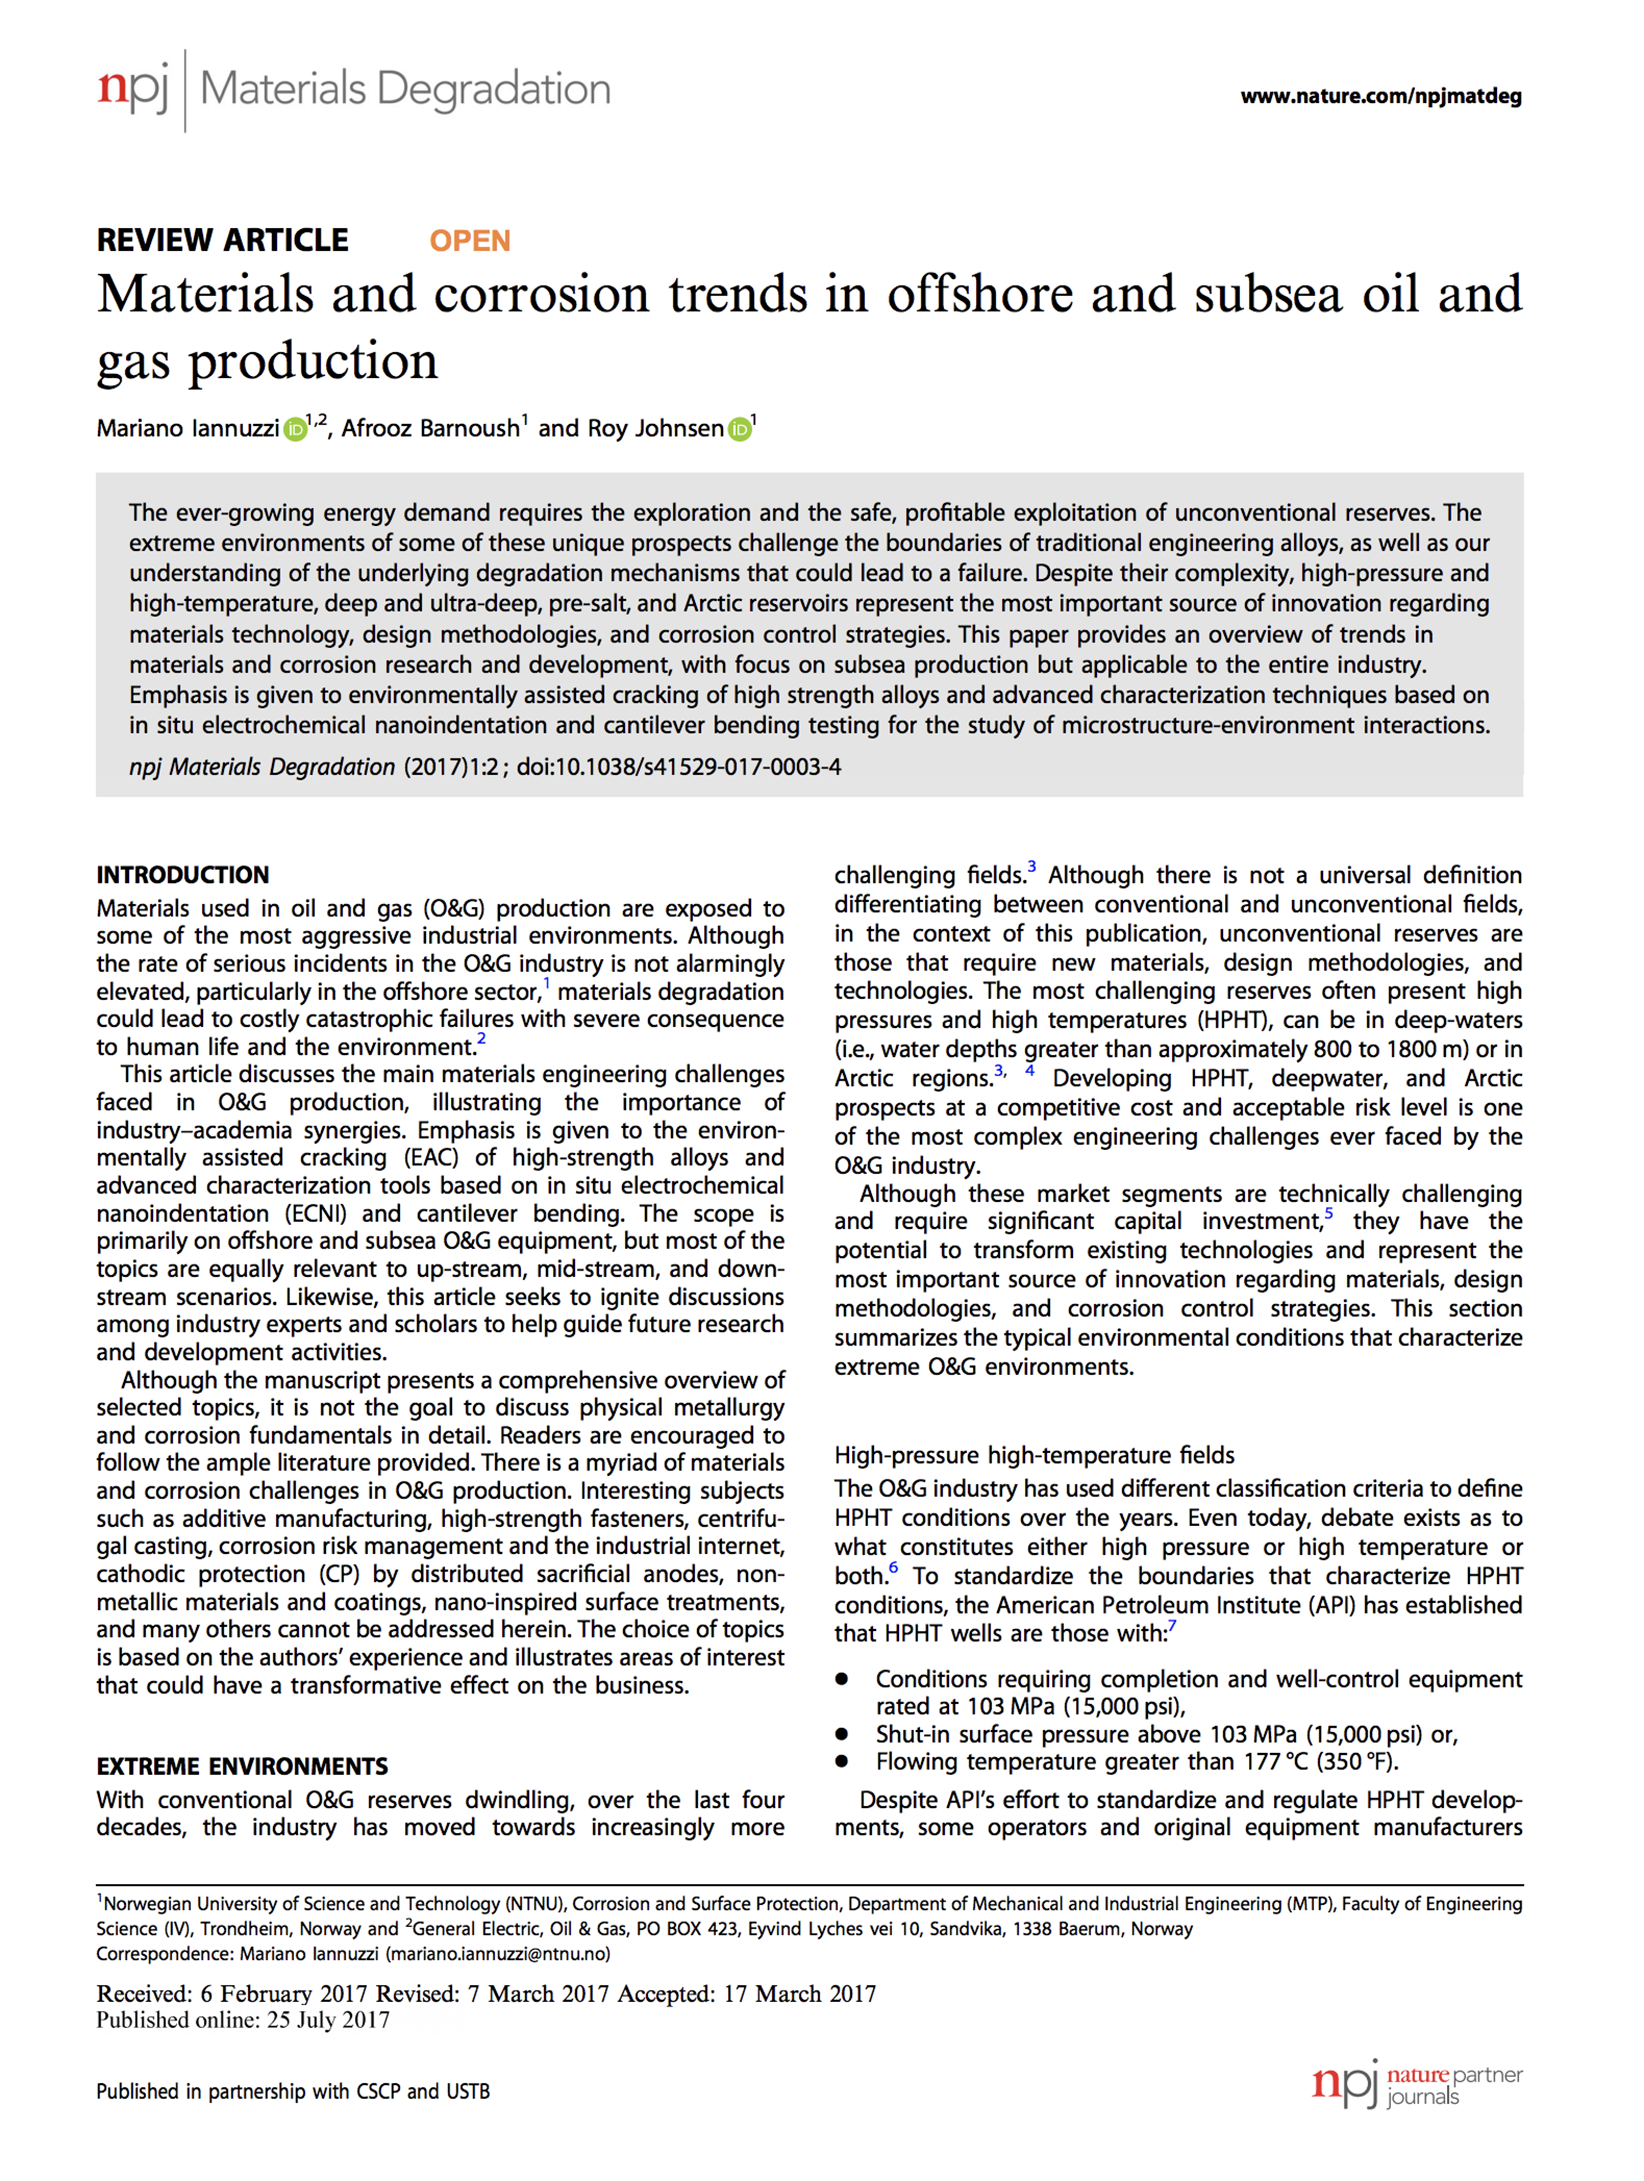 M. Iannuzzi, A. Barnoush, R. Johnsen, “Materials and corrosion trends in offshore and subsea oil and gas production,” npj Materials Degradation, 1 (2017) 1–11. doi: 10.1038/s41529–017–0003–4